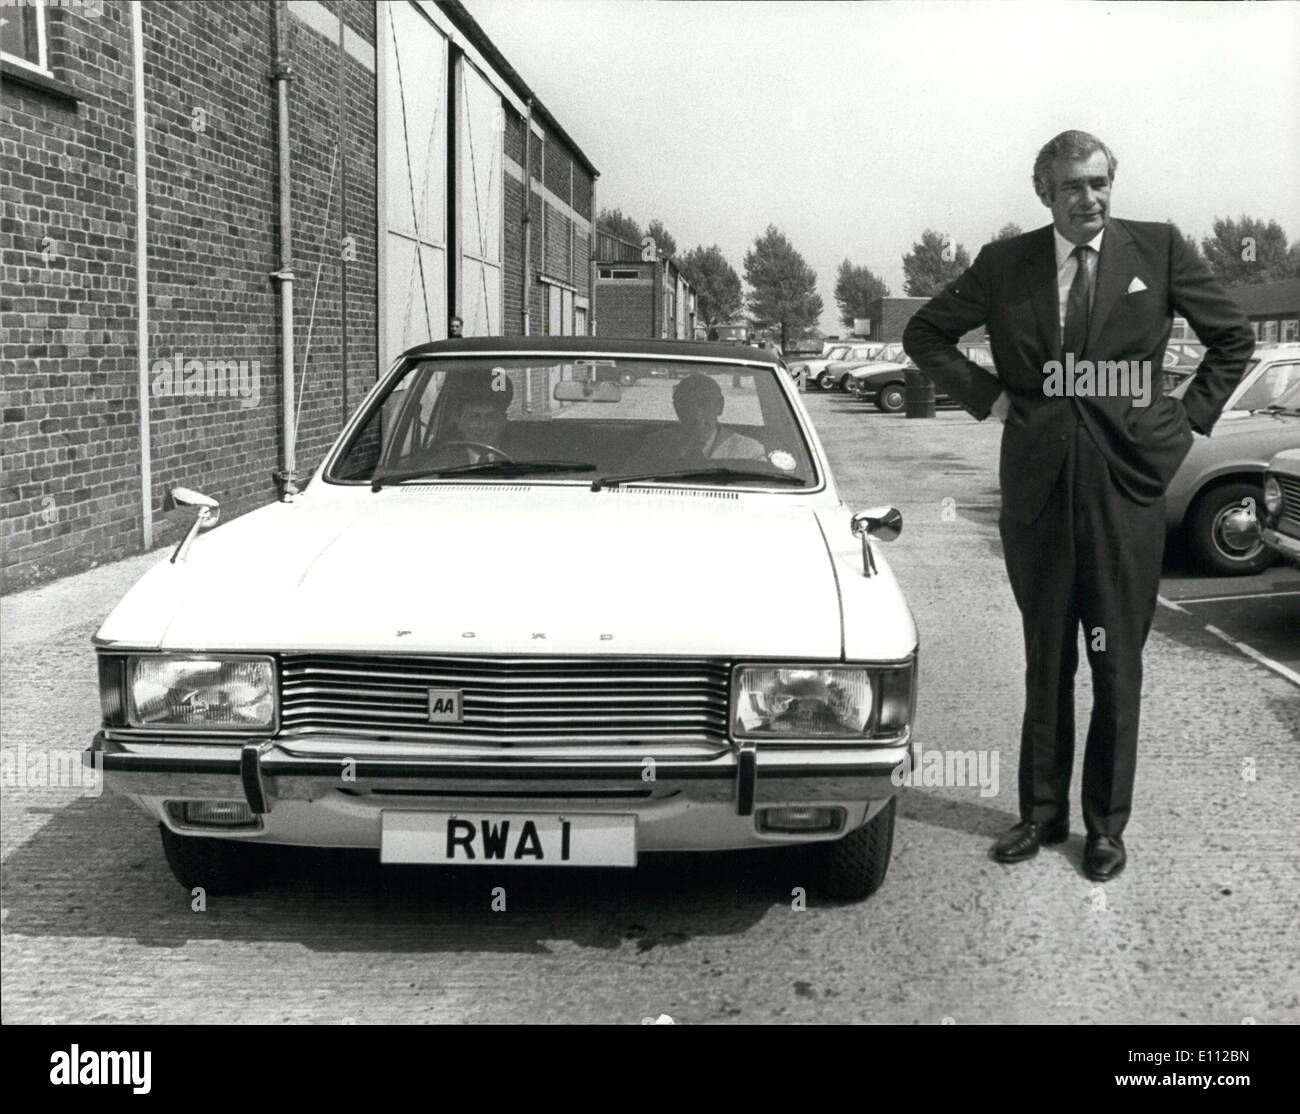 May 05, 1975 - &pound;1,000 Car Number For Official ''Little Bit of Fun''. A water authority chief who obtained special number for his official car at a cost of more than &pound;1000, was unrepentant. ''We thought it would be a little bit of fun'', he said. Mr. Peter John Liddell, 54, chairman of the North-West Regional Water Authority, told a Press conference at the authority's headquarters near Warrington, Lancs, that in any event the car was not exclusively for his use. Photo Shows:- Mr Stock Photo